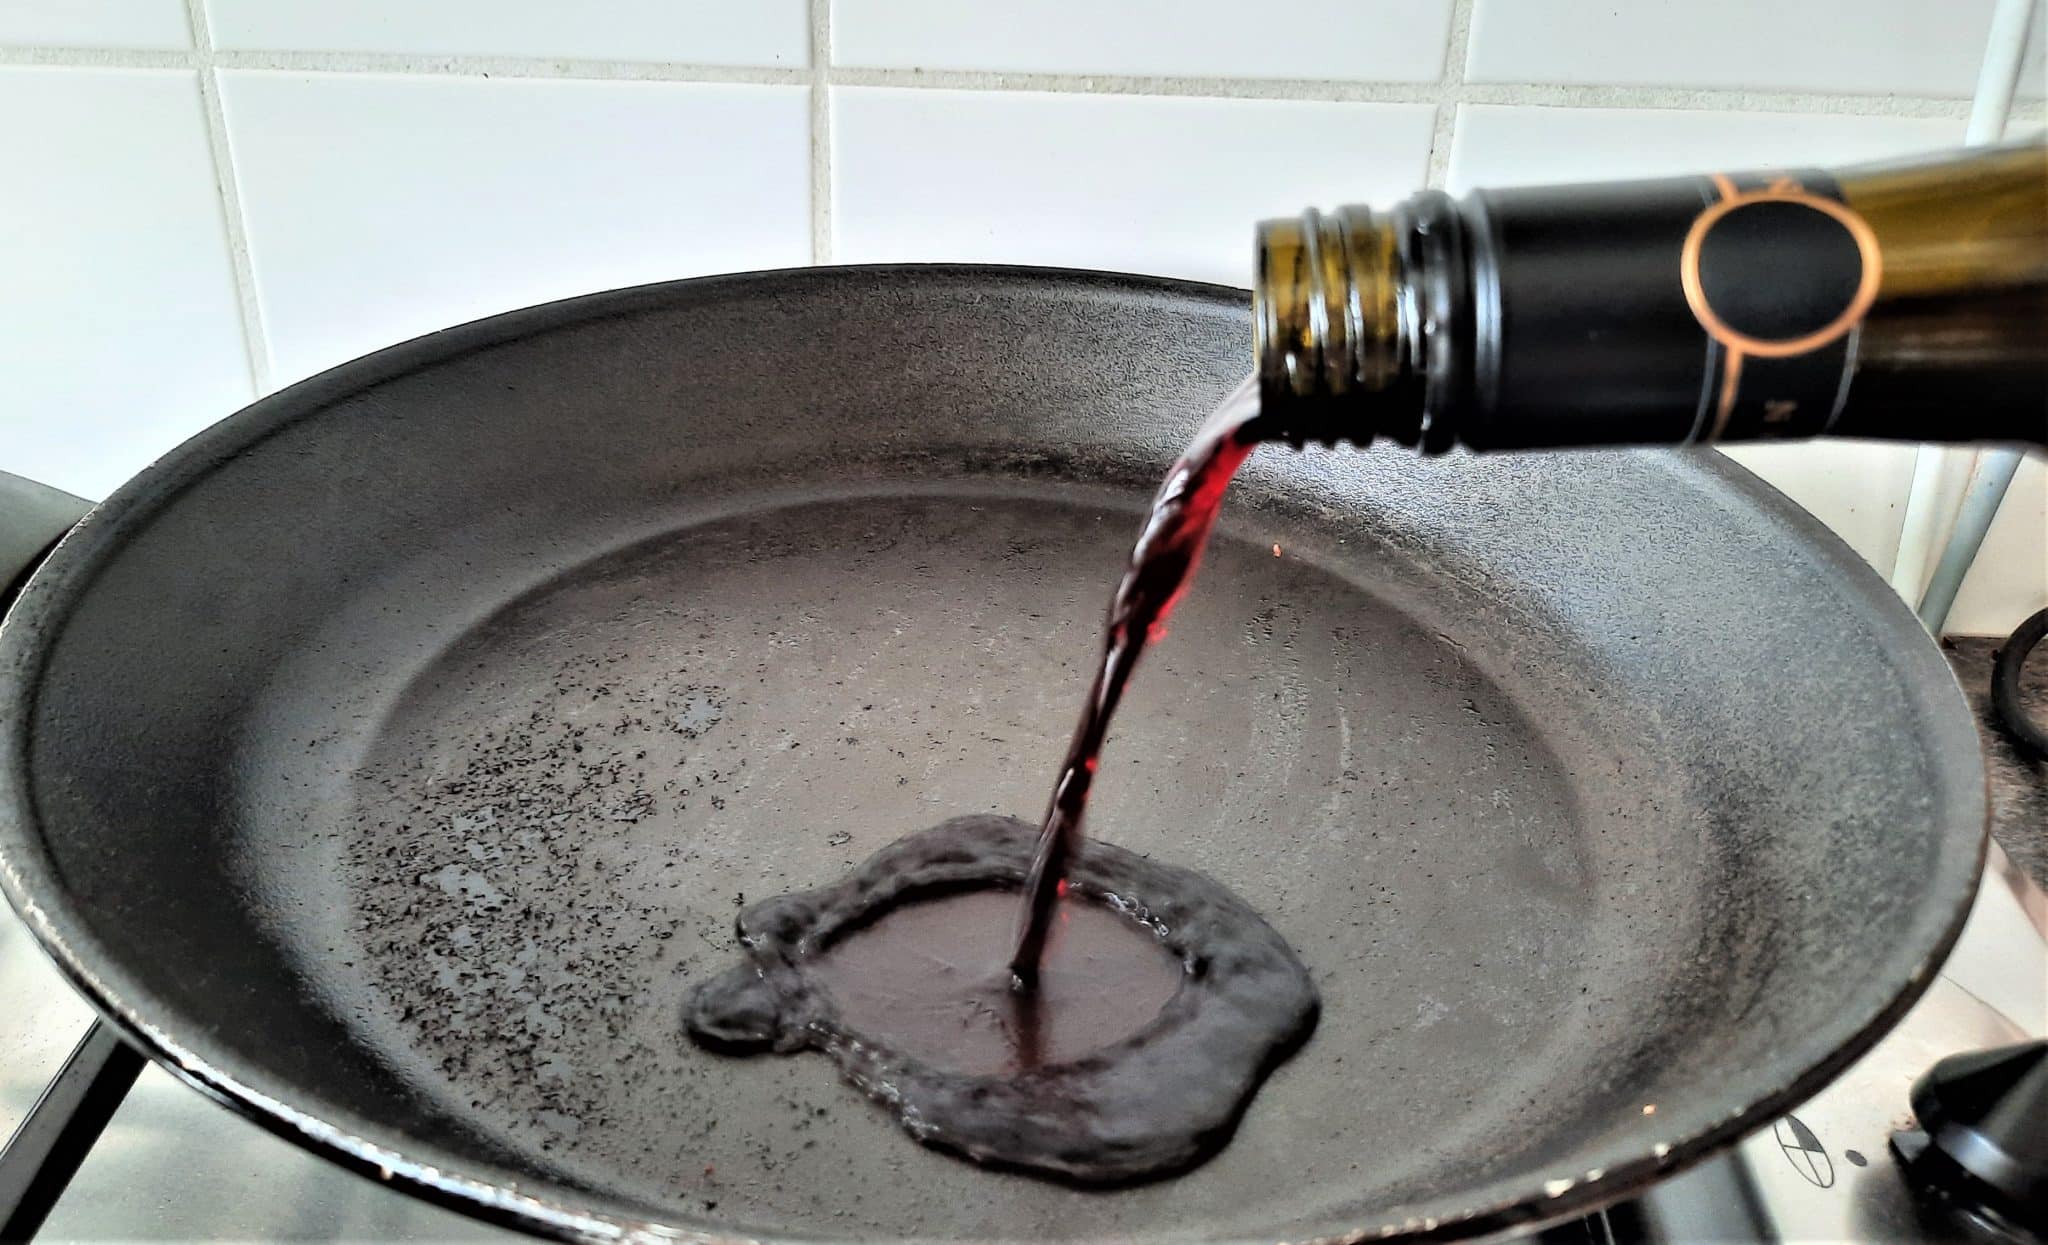 Why Should you add Wine to the Pan?